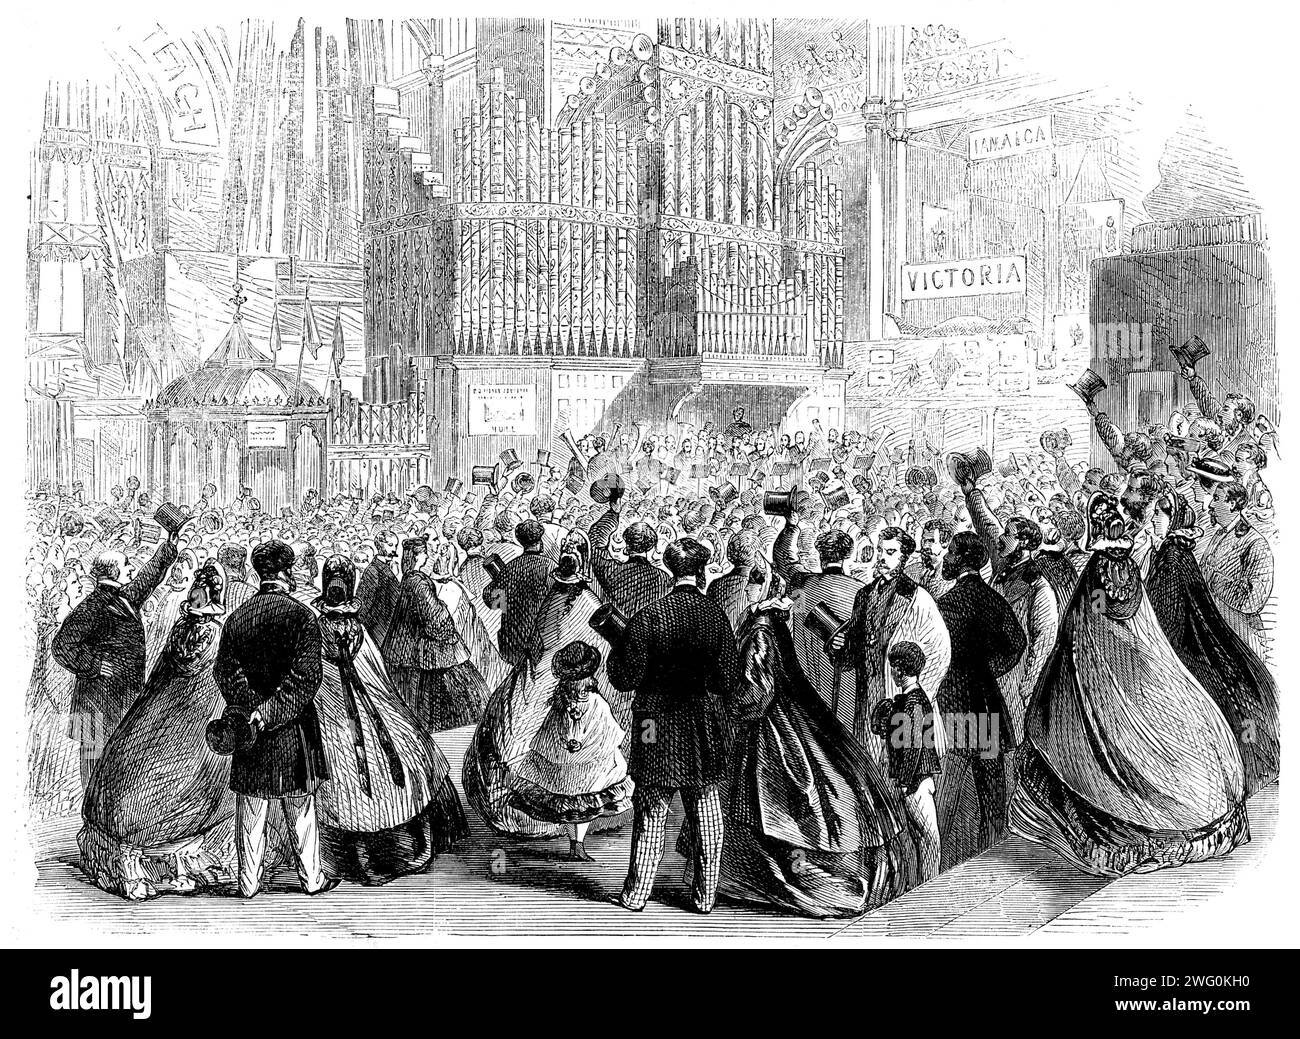 The International Exhibition: a scene near the Eastern Dome on the closing day, 1862. 'Whether from accident or with a design to draw off some of the human pressure from the western portion of the building, some little time before four o'clock, the hour appointed for the closing, a large number of persons were attracted towards the eastern dome by the appearance of Messrs. Distins' band, which took up a position beneath Foster and Andrews' large organ, which stood in the north-eastern transept close to the steps leading to the platform of the dome. The strains of &quot;God Save the Queen&quot; Stock Photo